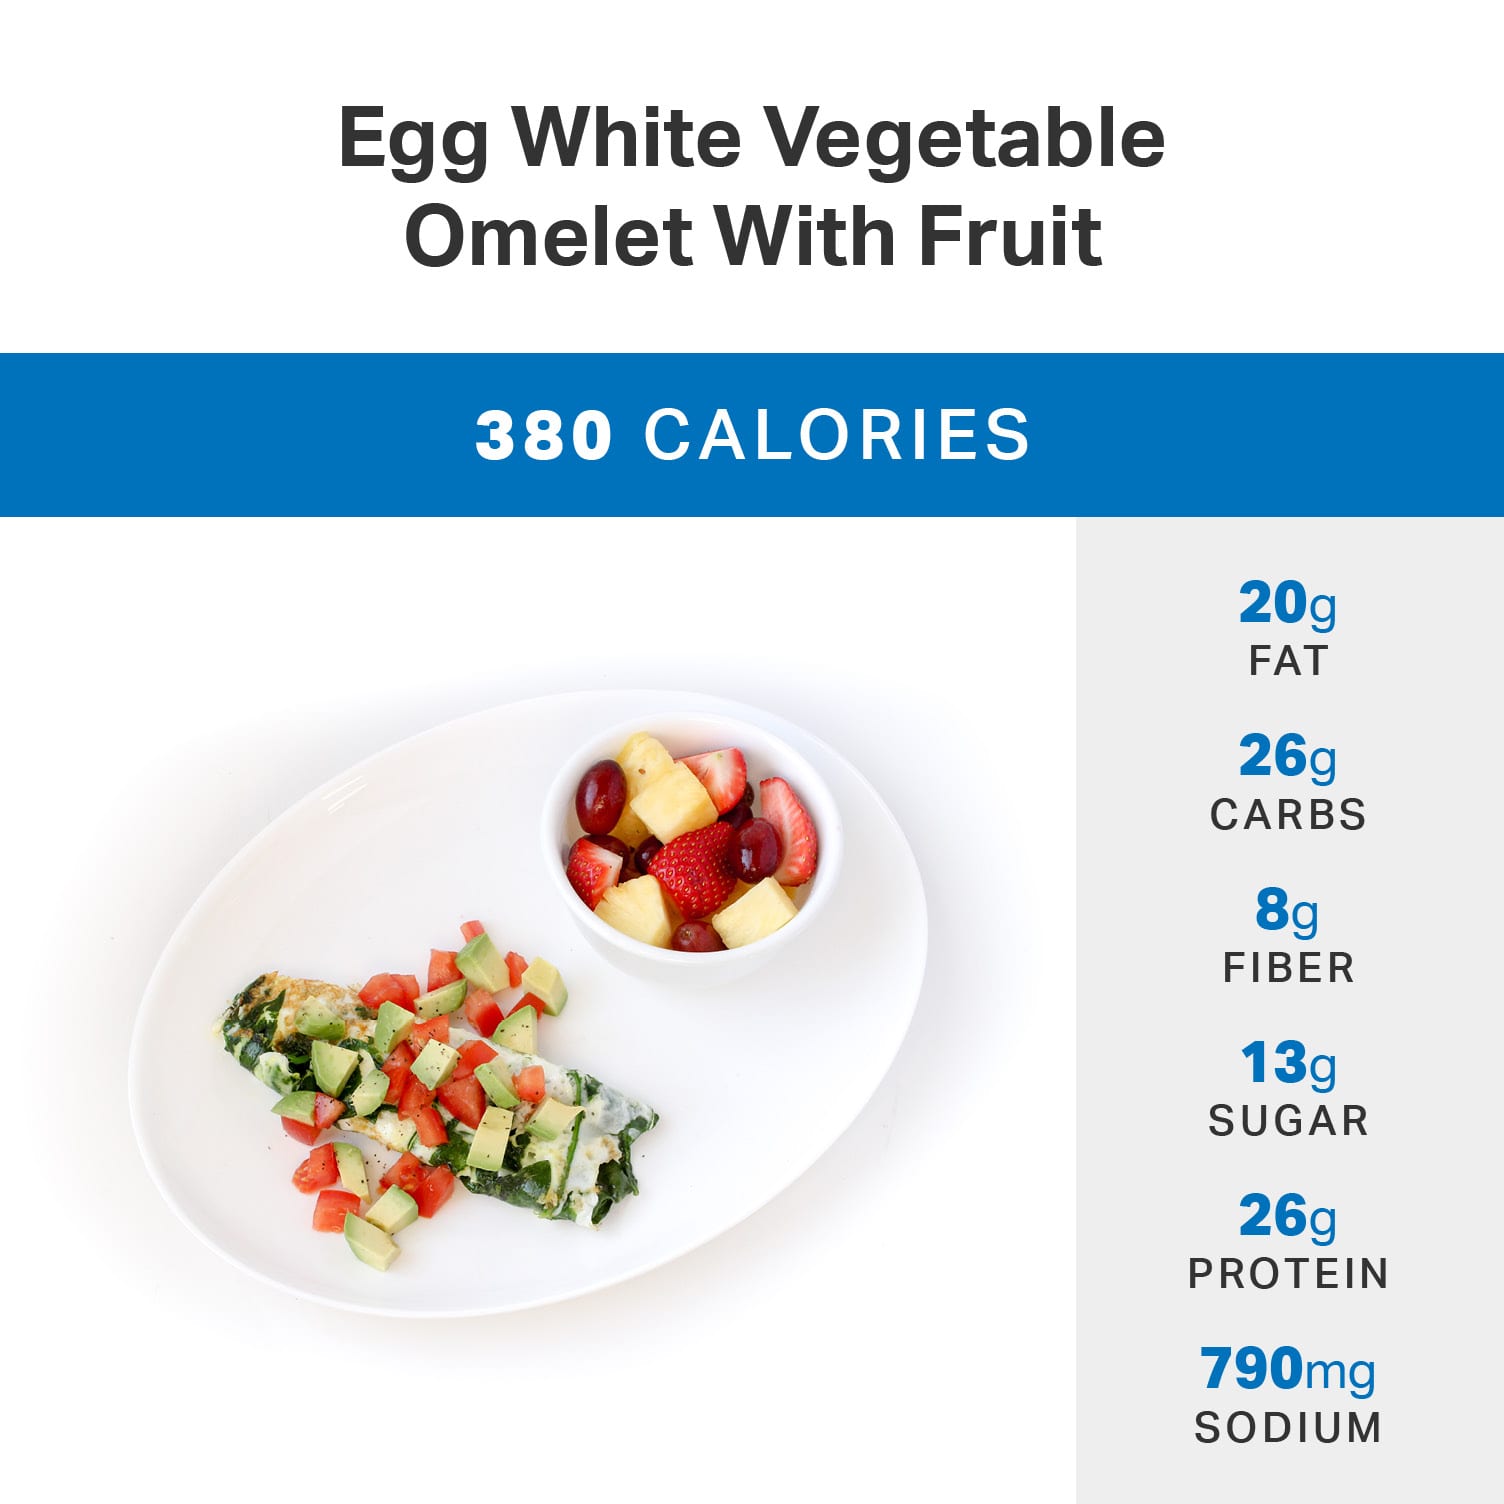 Healthy Ways to Order at IHOP | Nutrition | MyFitnessPal